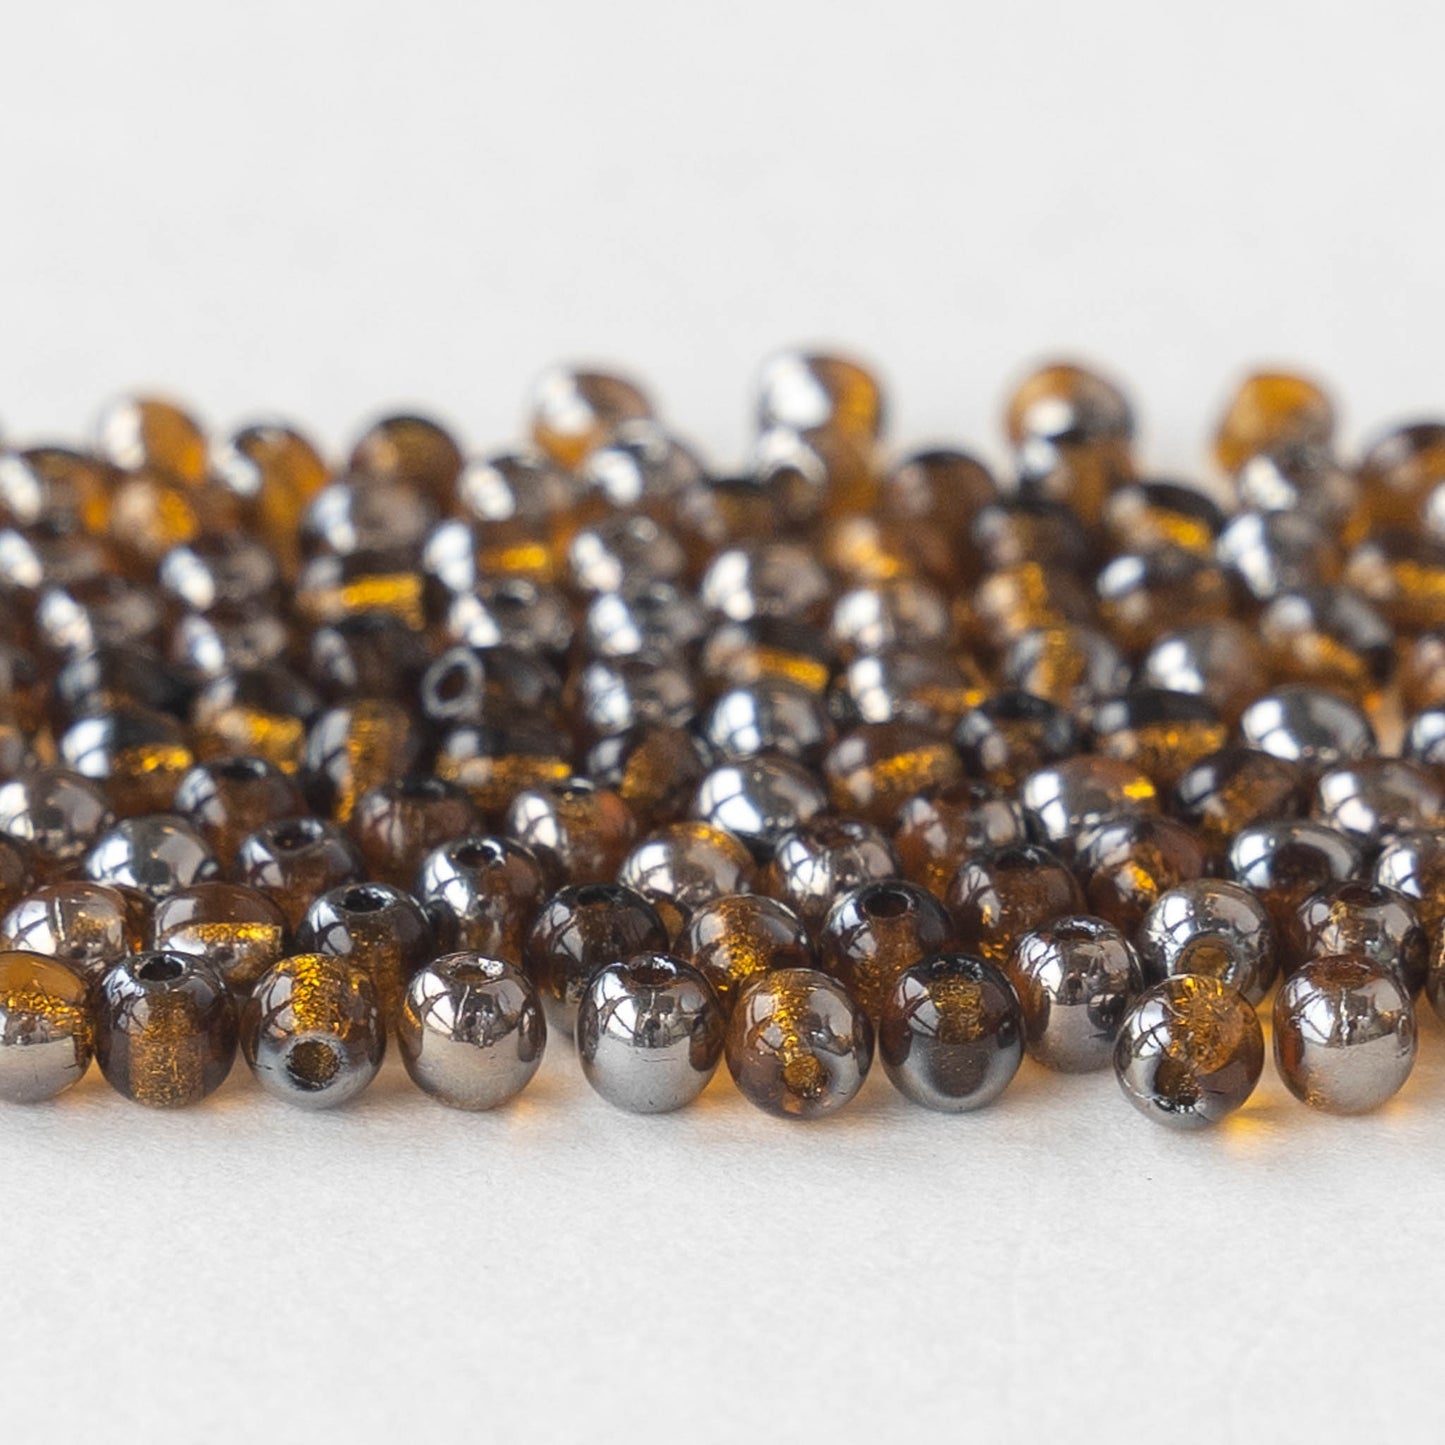 3mm Round Glass Beads - Amber and Silver - 120